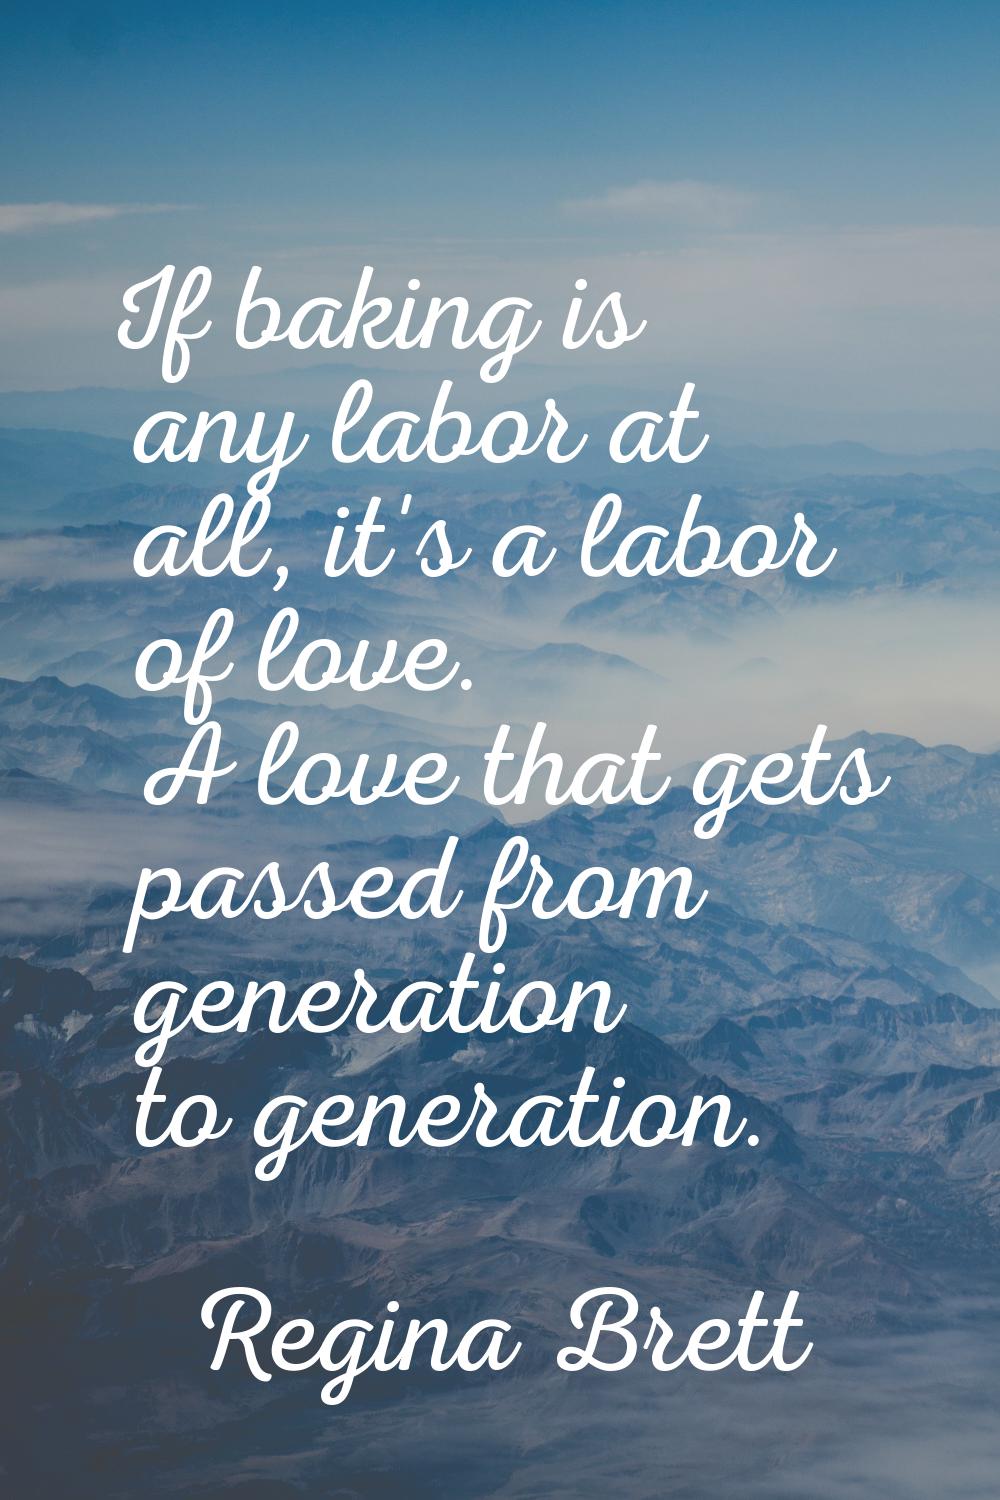 If baking is any labor at all, it's a labor of love. A love that gets passed from generation to gen